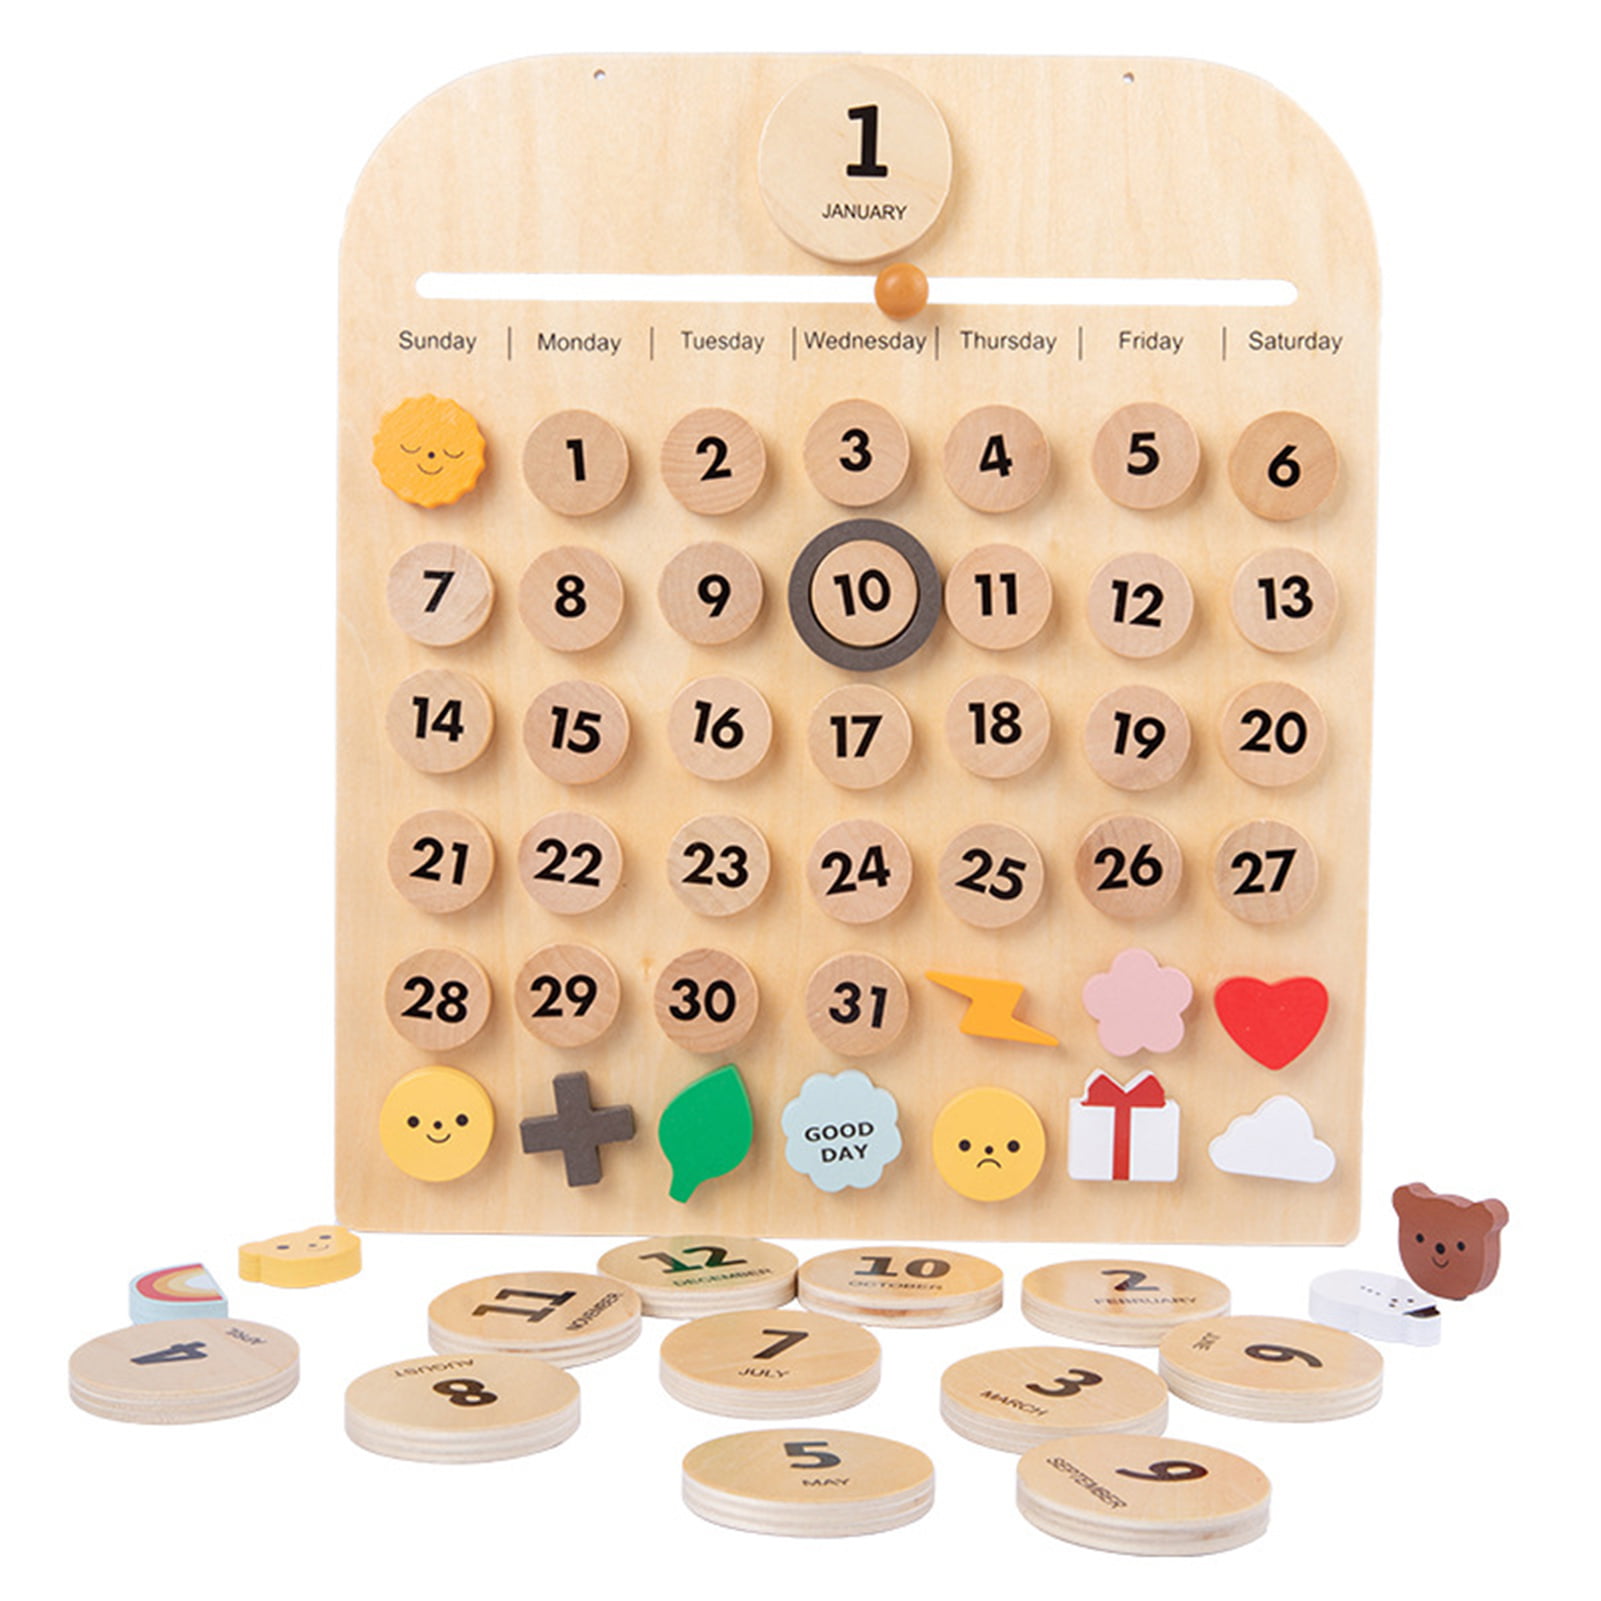 15 Minute Timer Sllek Wood Timer Gift Boxed TedCo 5-10 Ages 14 and Up 